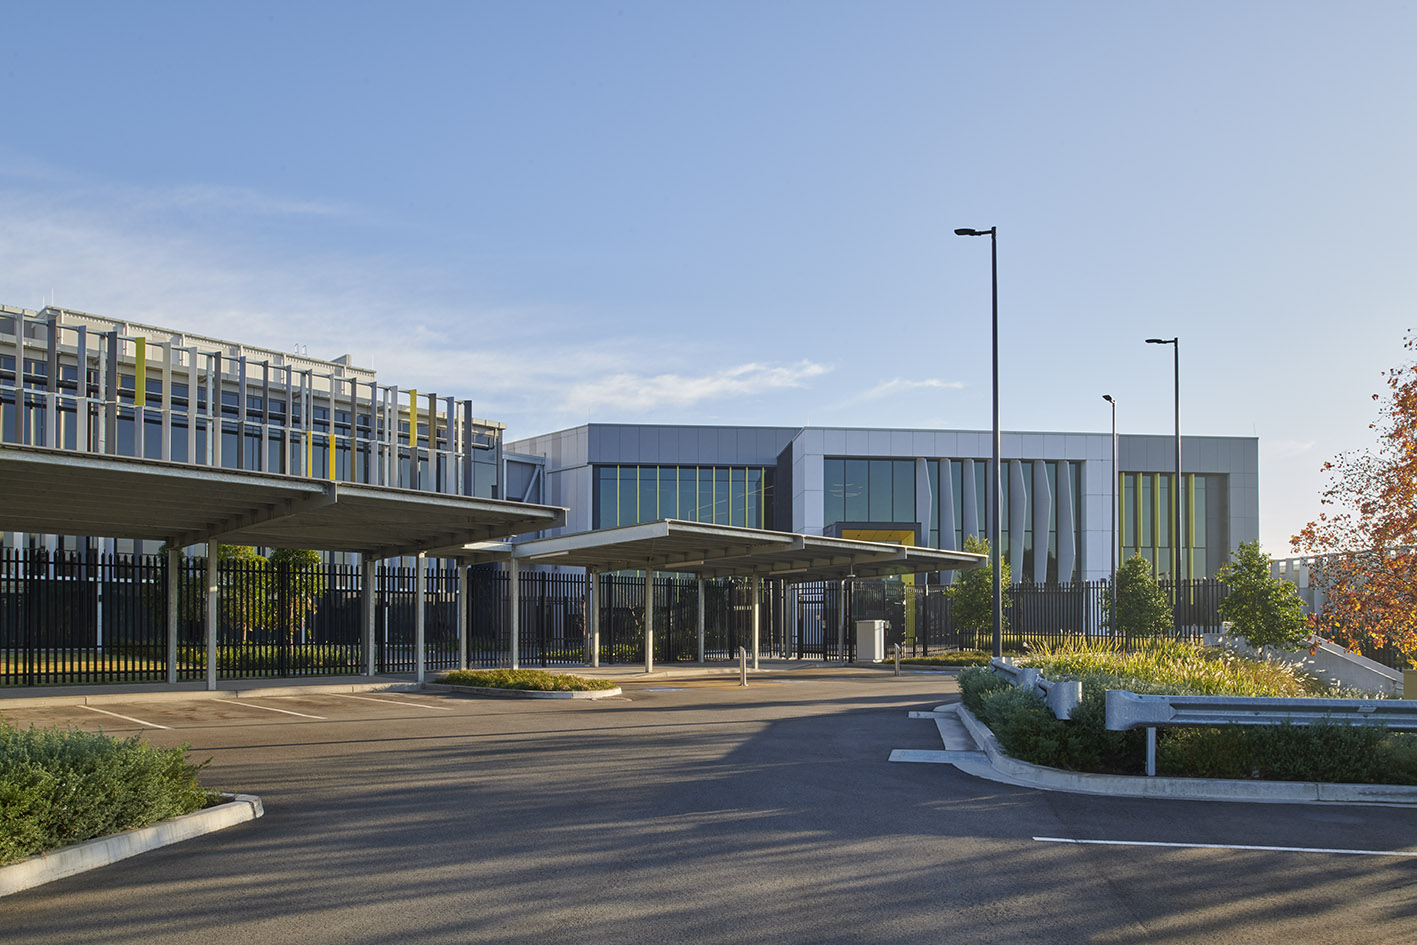 Western Sydney International Airport building where the digital aerodrome services are conducted.